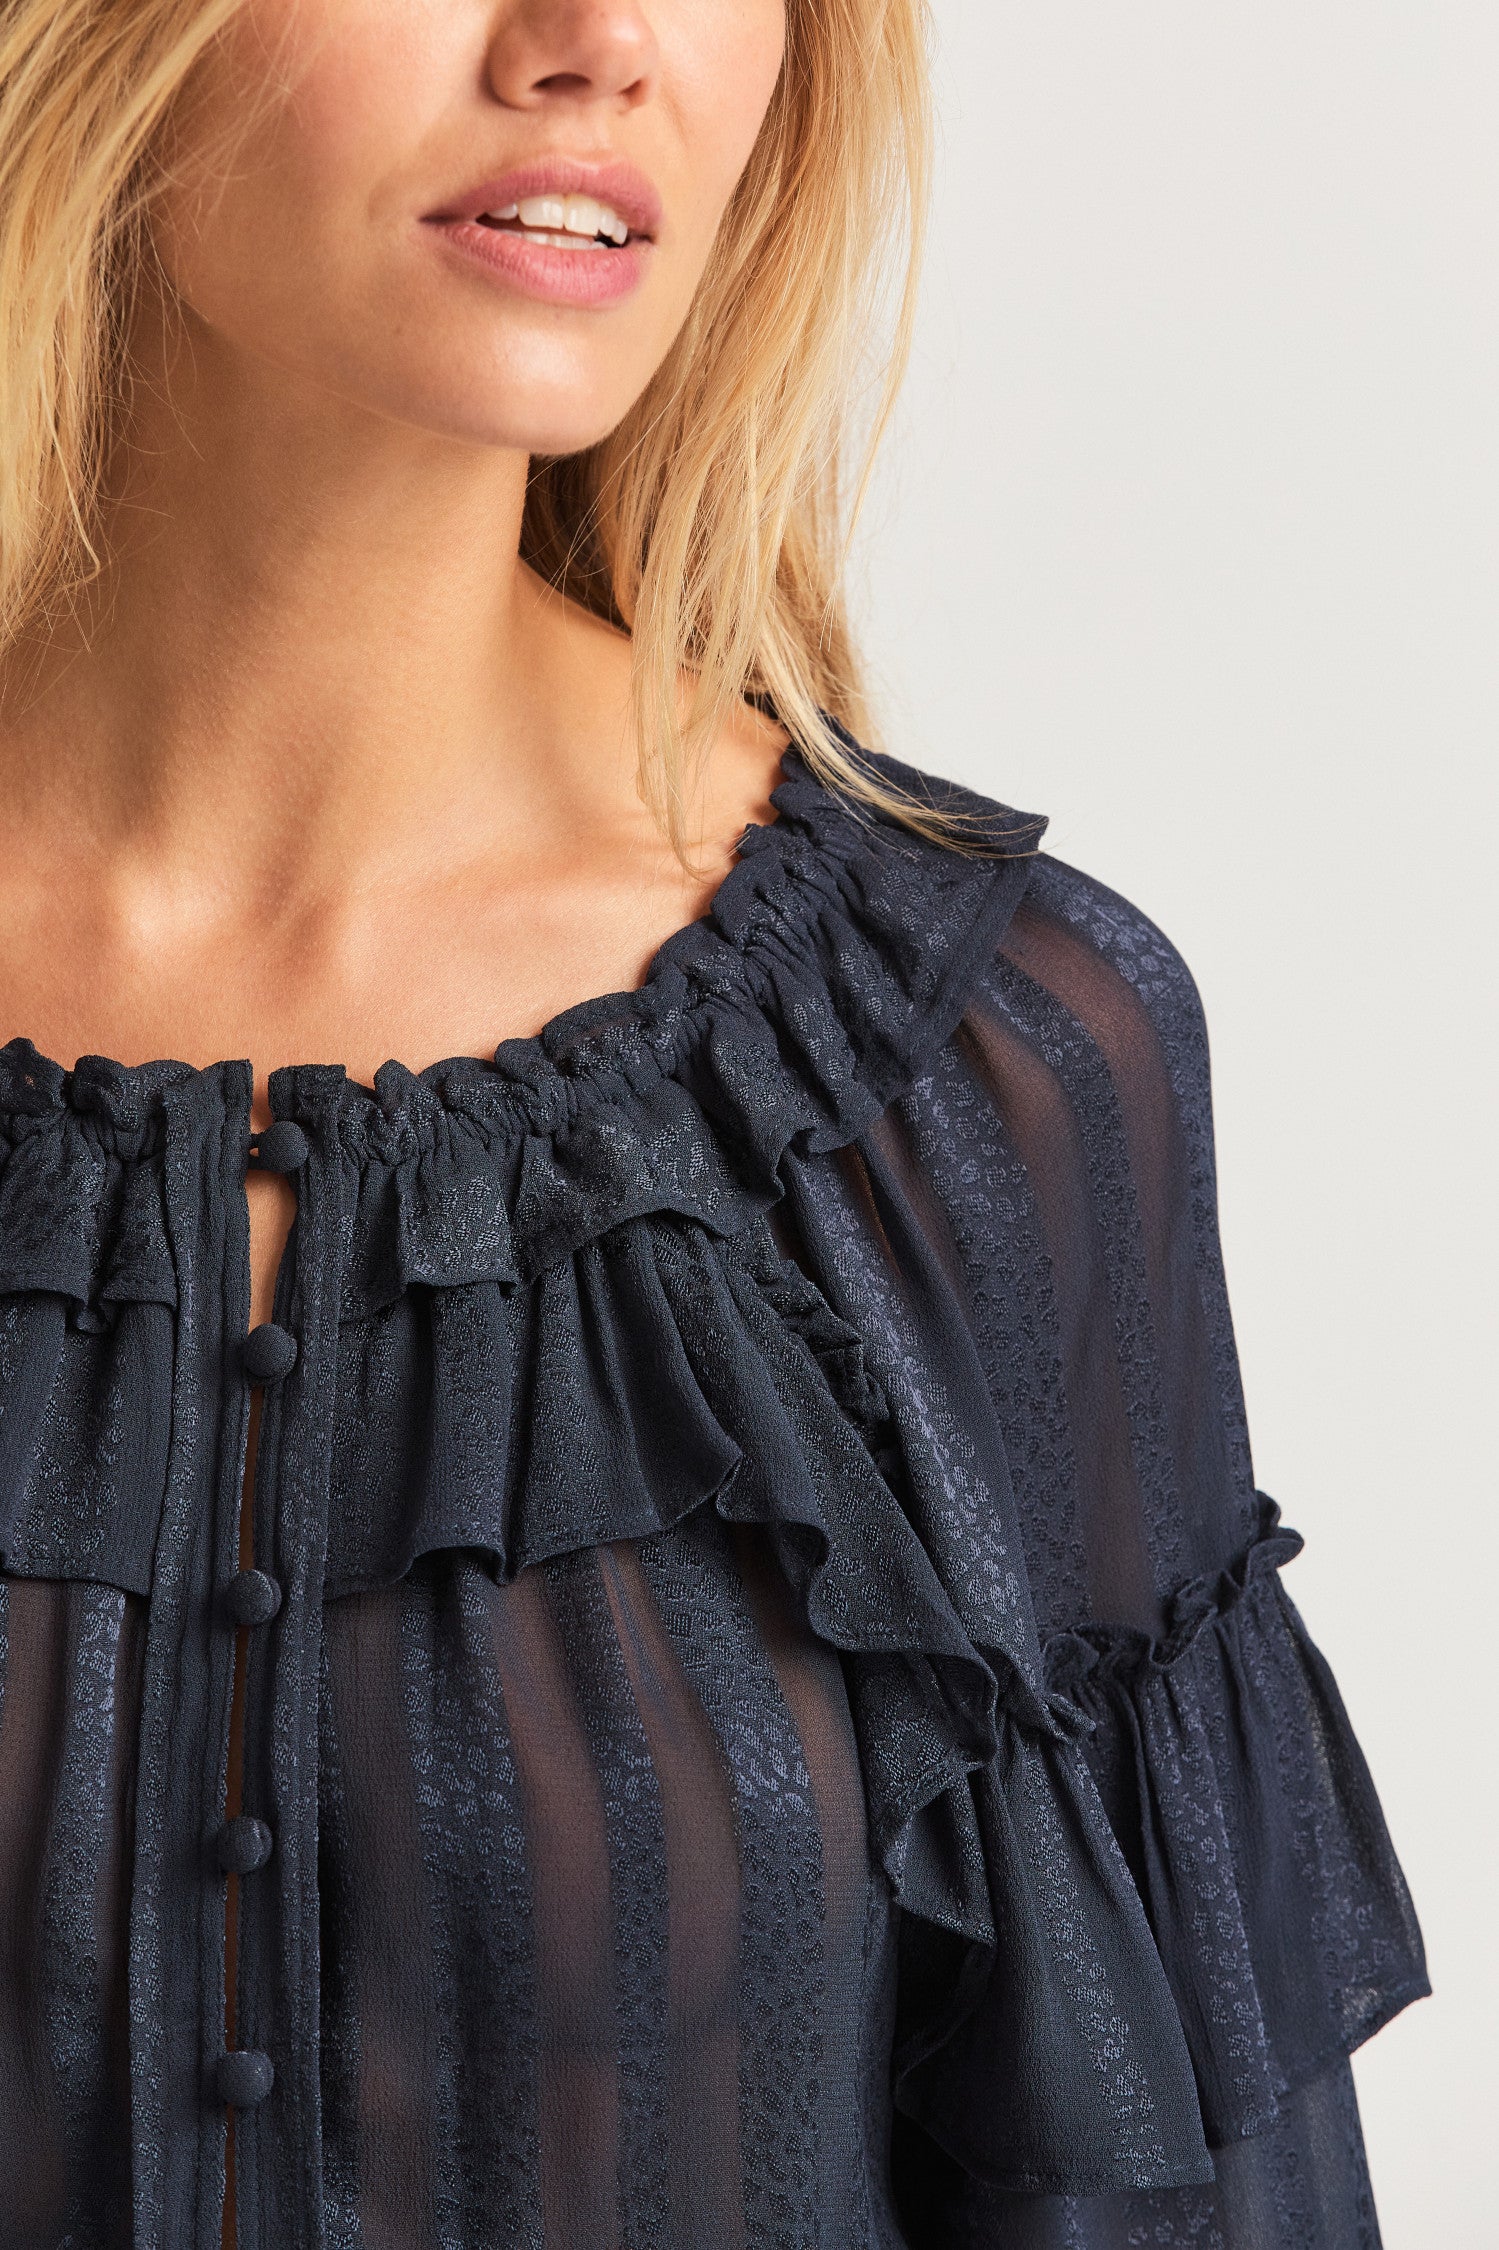 Black long sleeved-top features a striped jacquard fabric, dramatic ruffles all over, an elasticated waist, elastic at the sleeve openings, and a fully functioning center front slit.